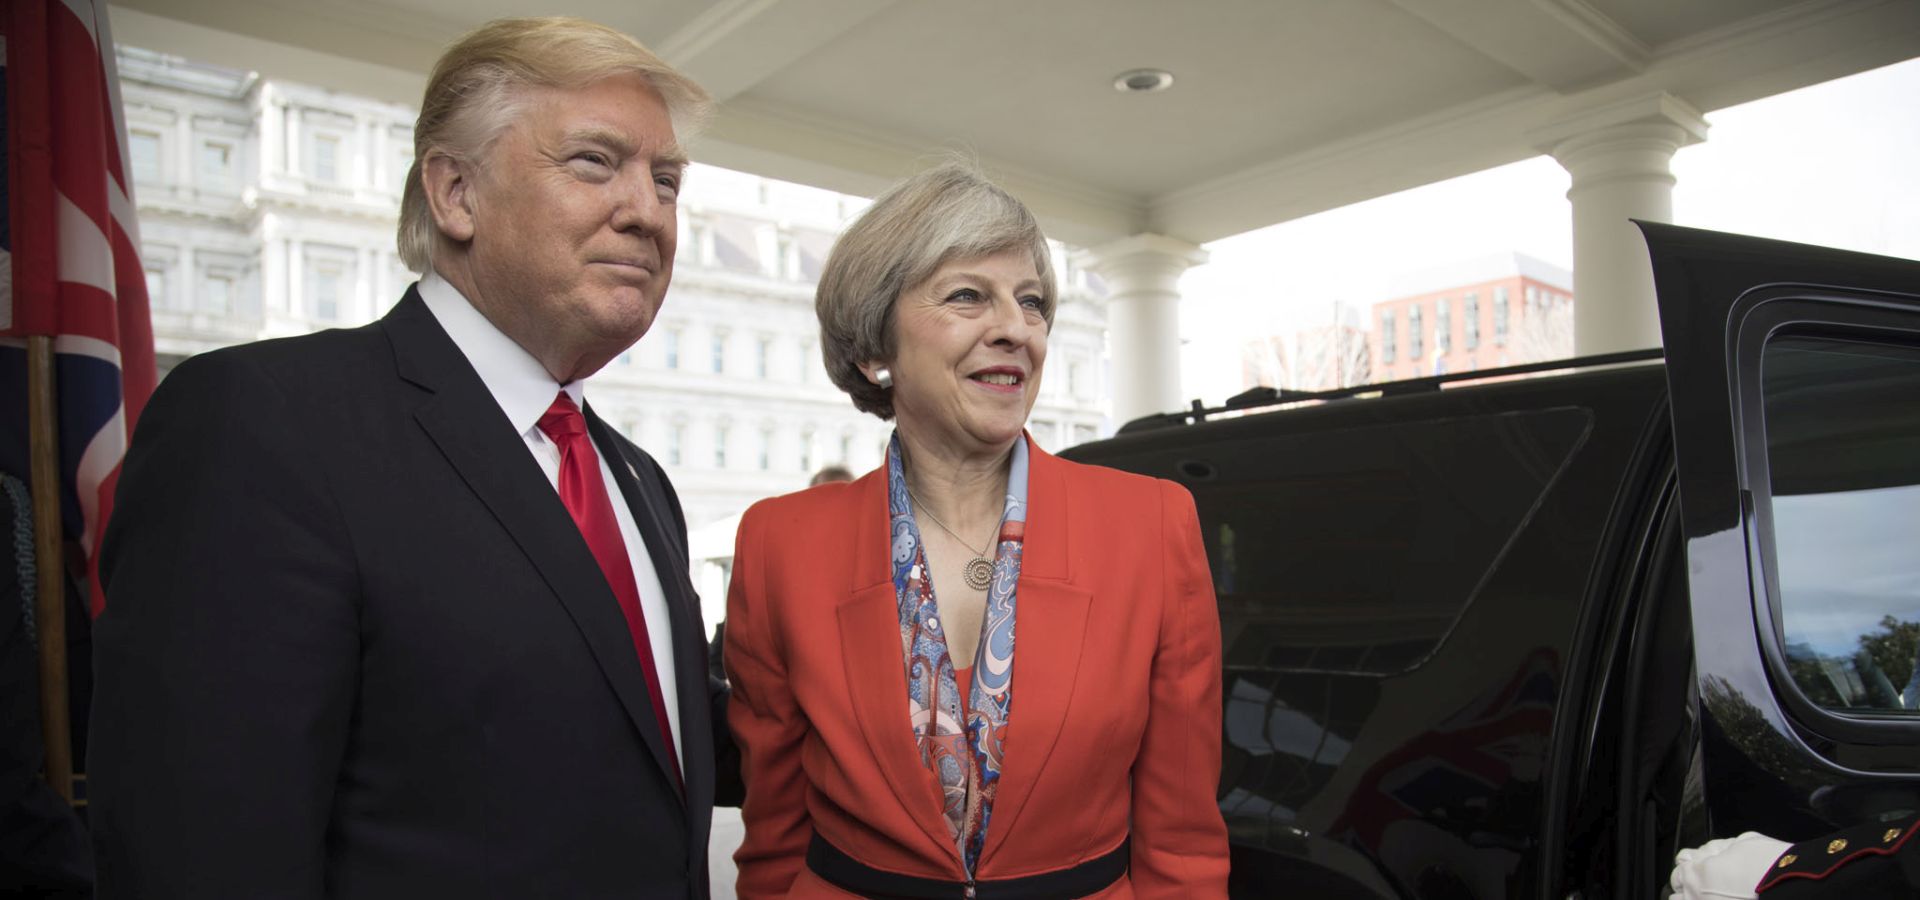 President Donald Trump greets British Prime Minister Theresa May upon her arrival, Friday, Jan. 27, 2017, to the West Wing entrance of the White House in Washington, D.C. (Official White House Photo by Shealah Craighead)